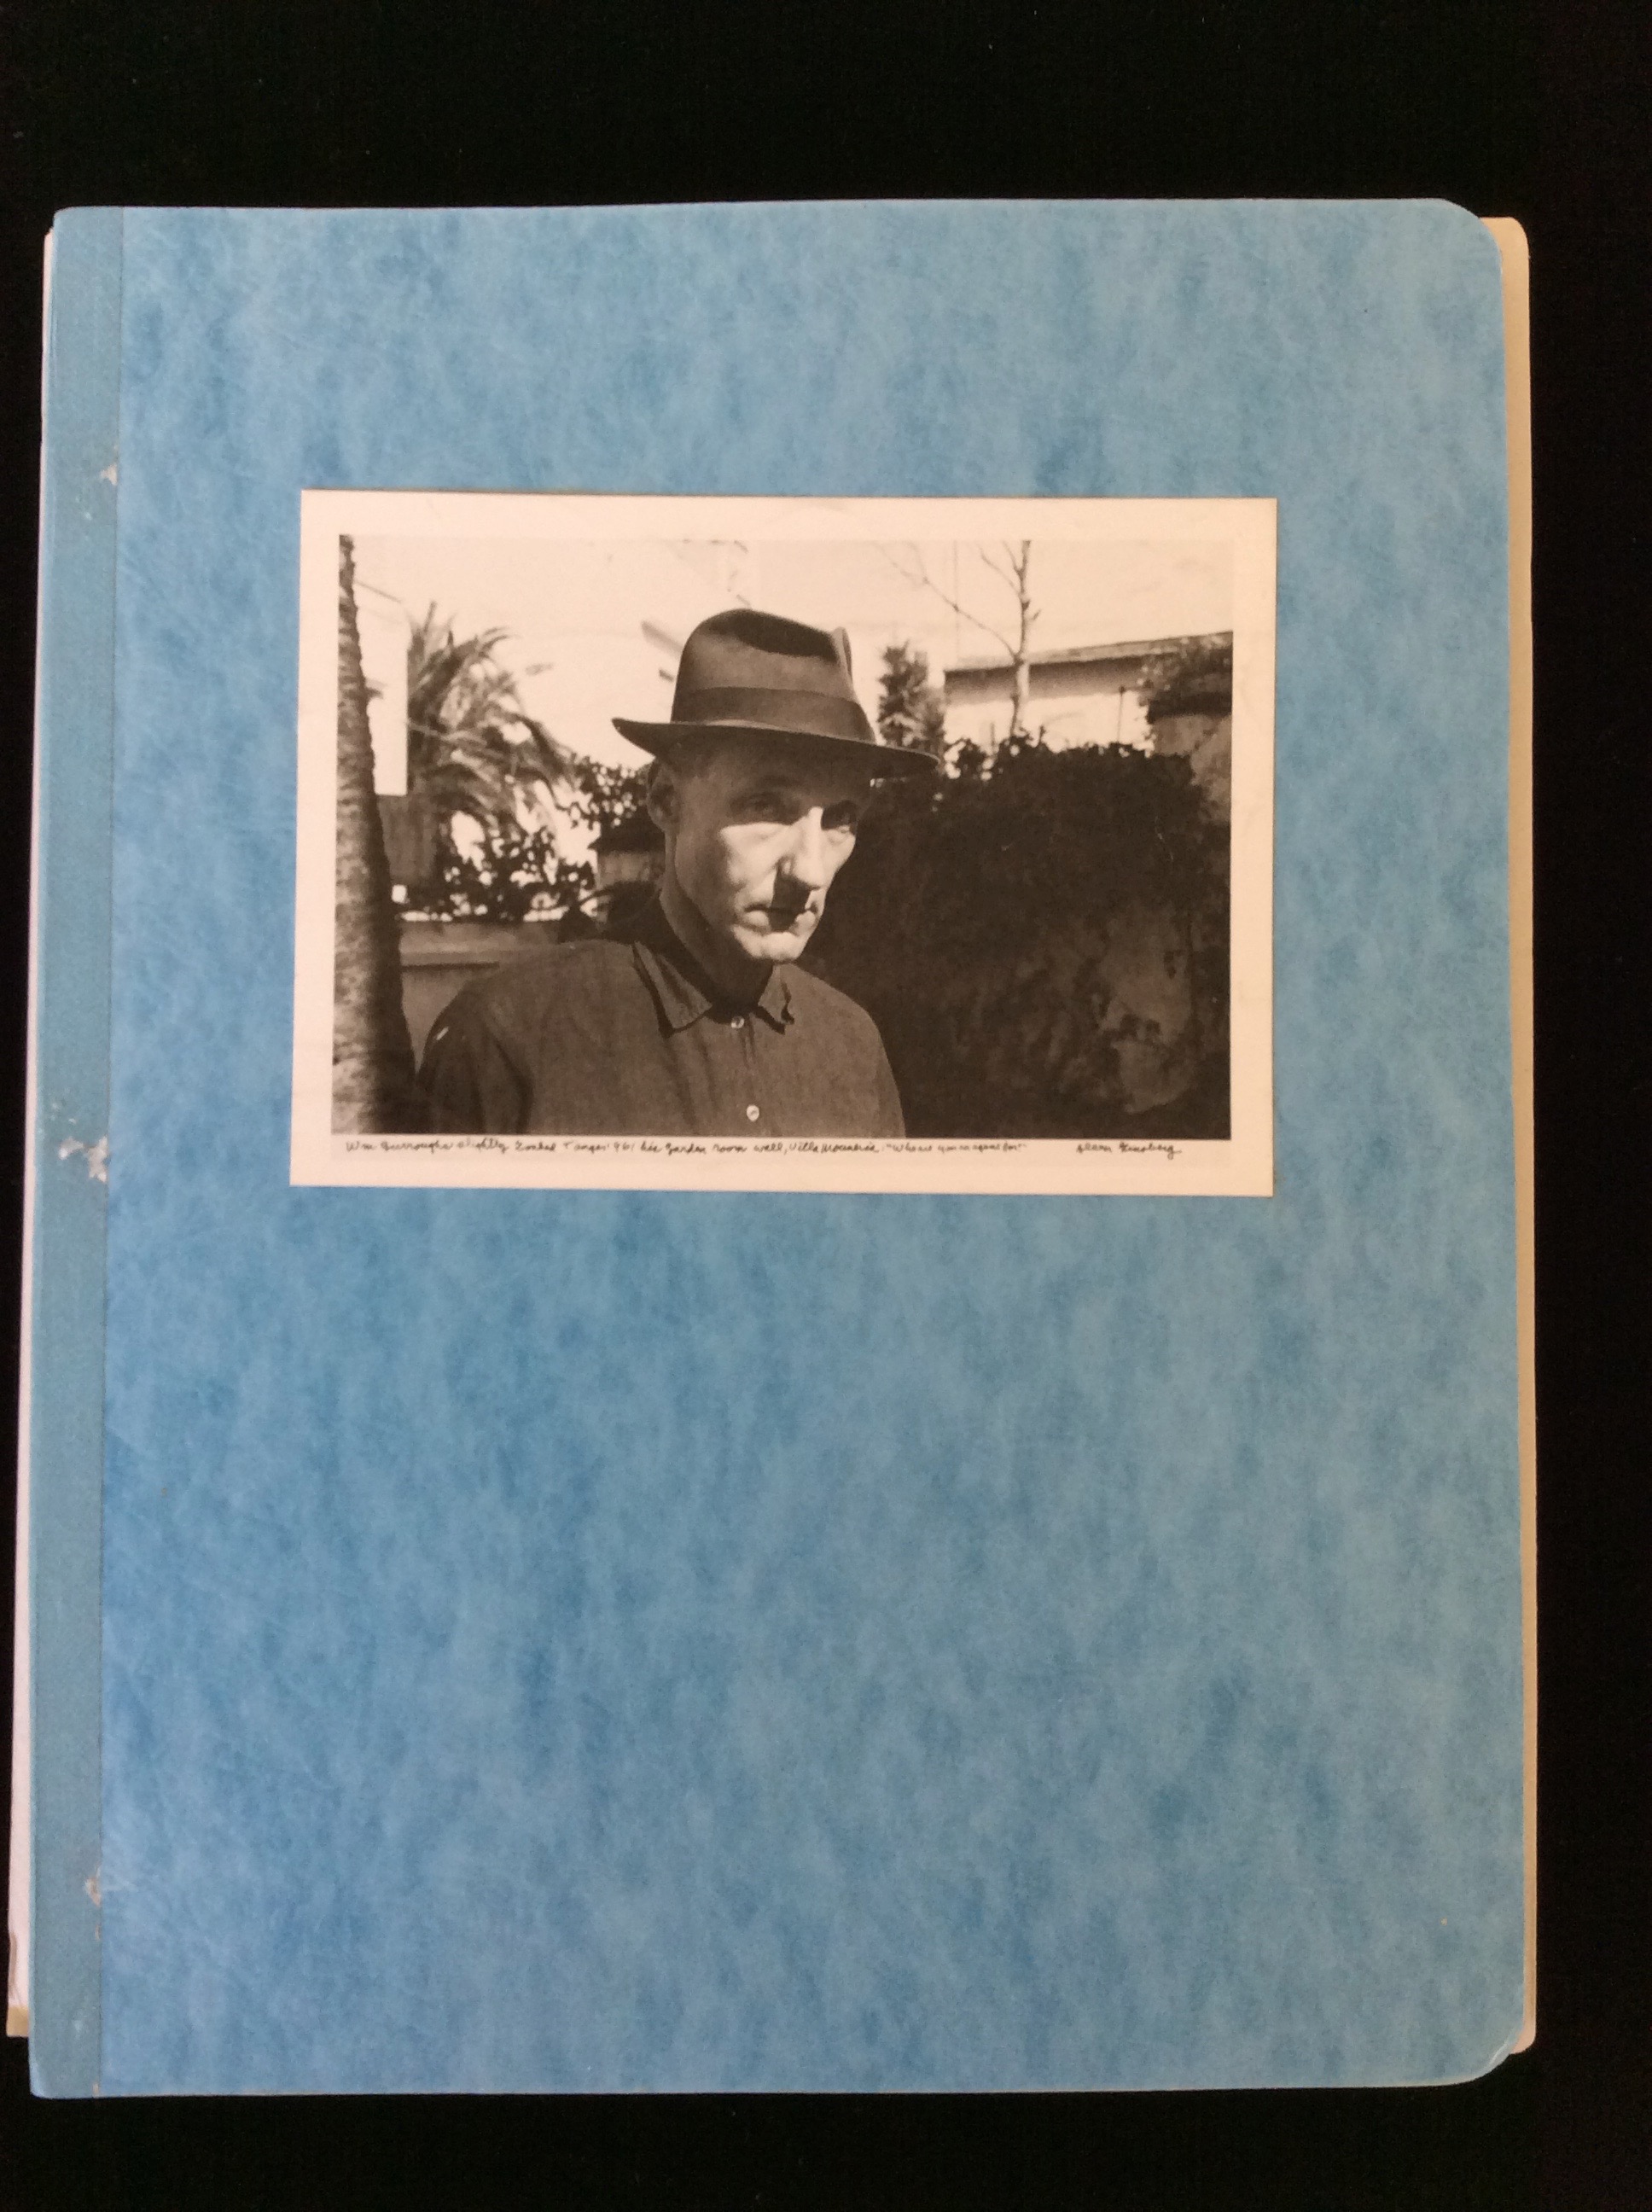 Collecting William S. Burroughs in Print: A Checklist